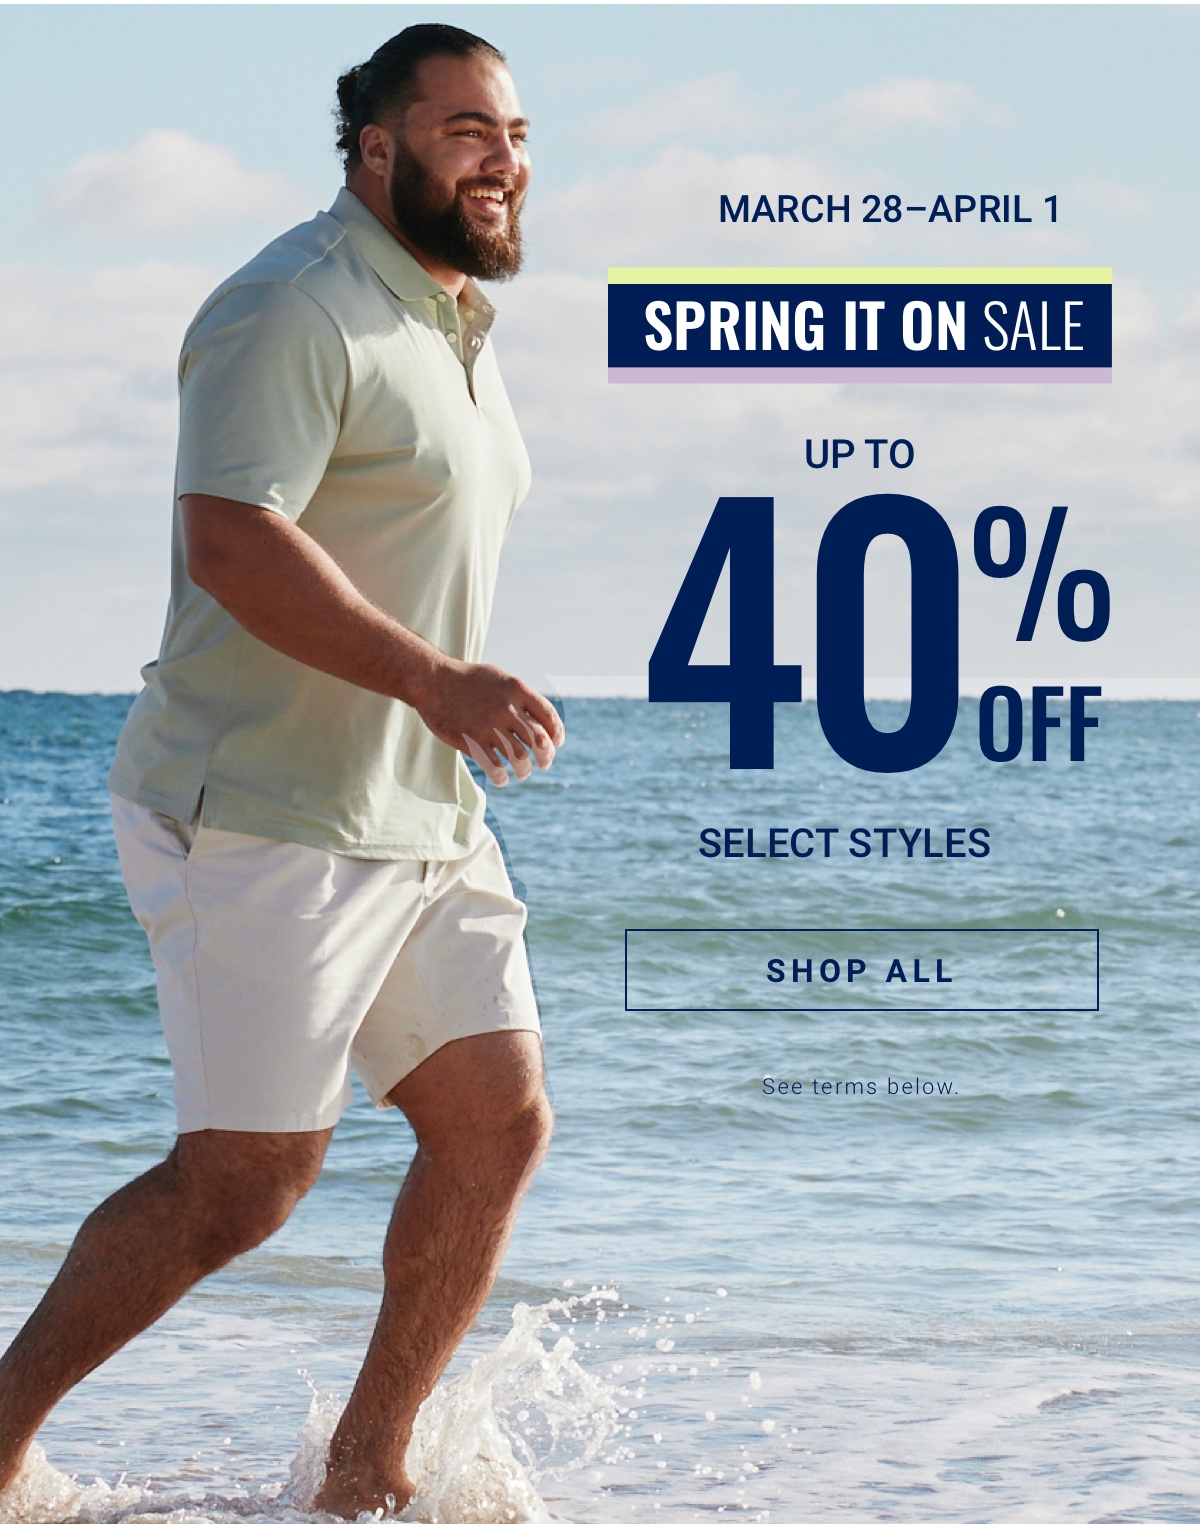 March 28 thru April 1|Spring It On Sale|Up to 40% Off